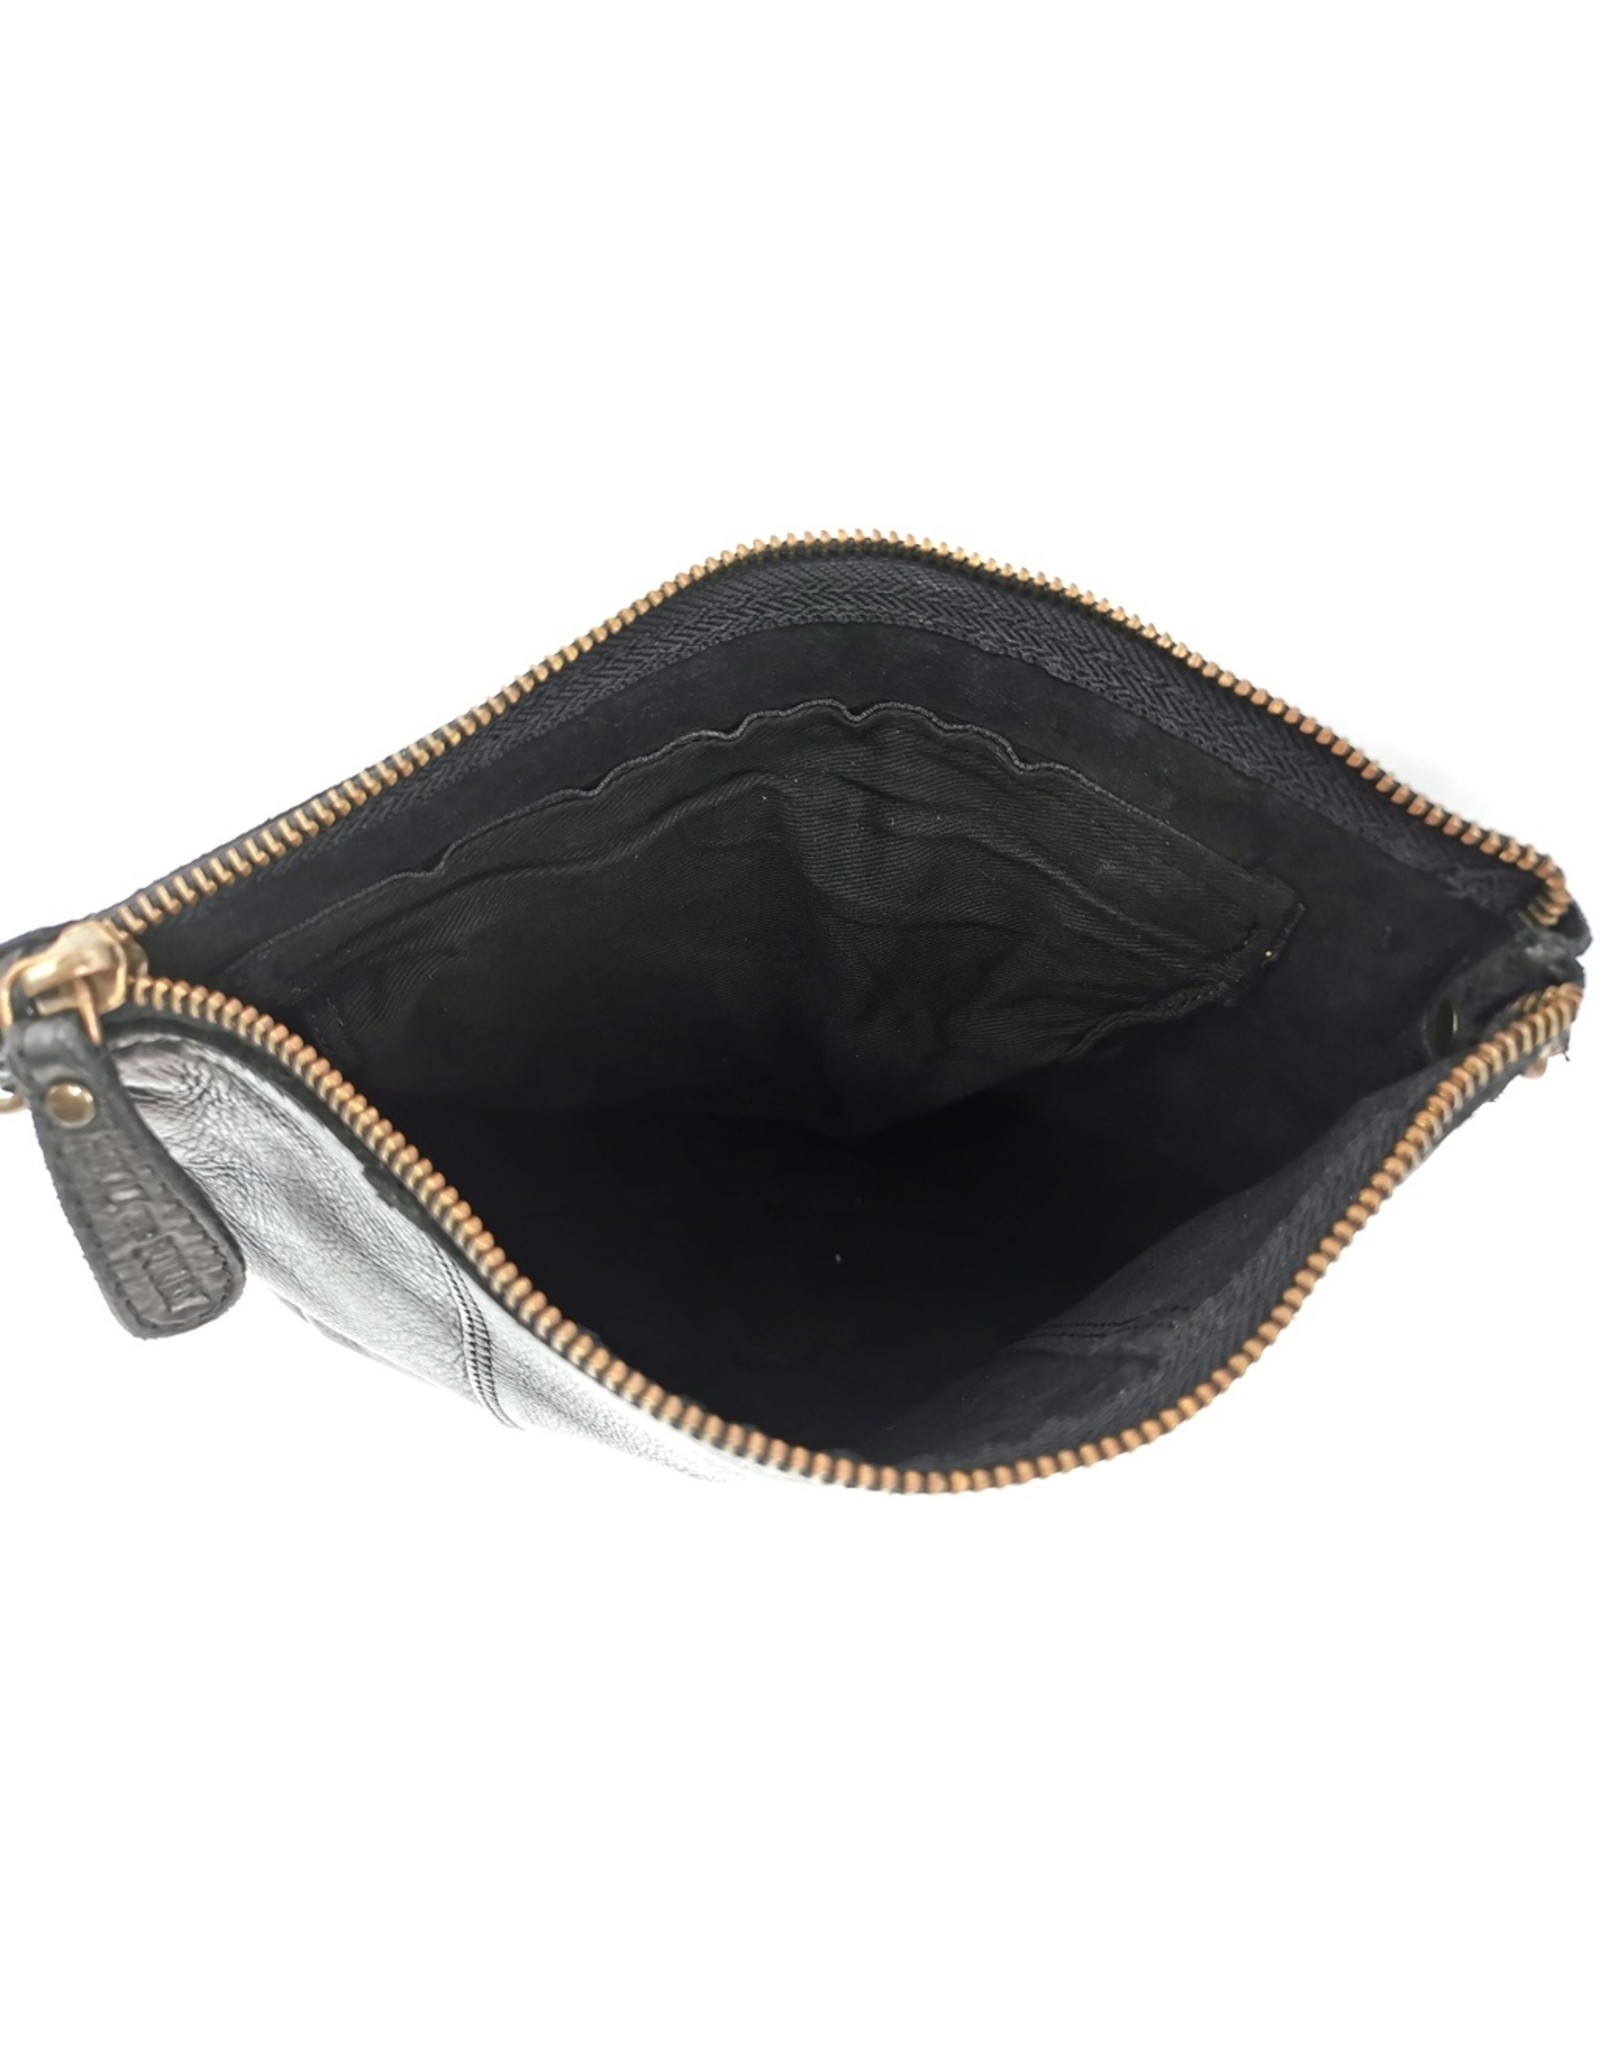 HillBurry Small leather bags, clutches and more - Hillburry Shoulder Bag - Clutch Washed Leather Black